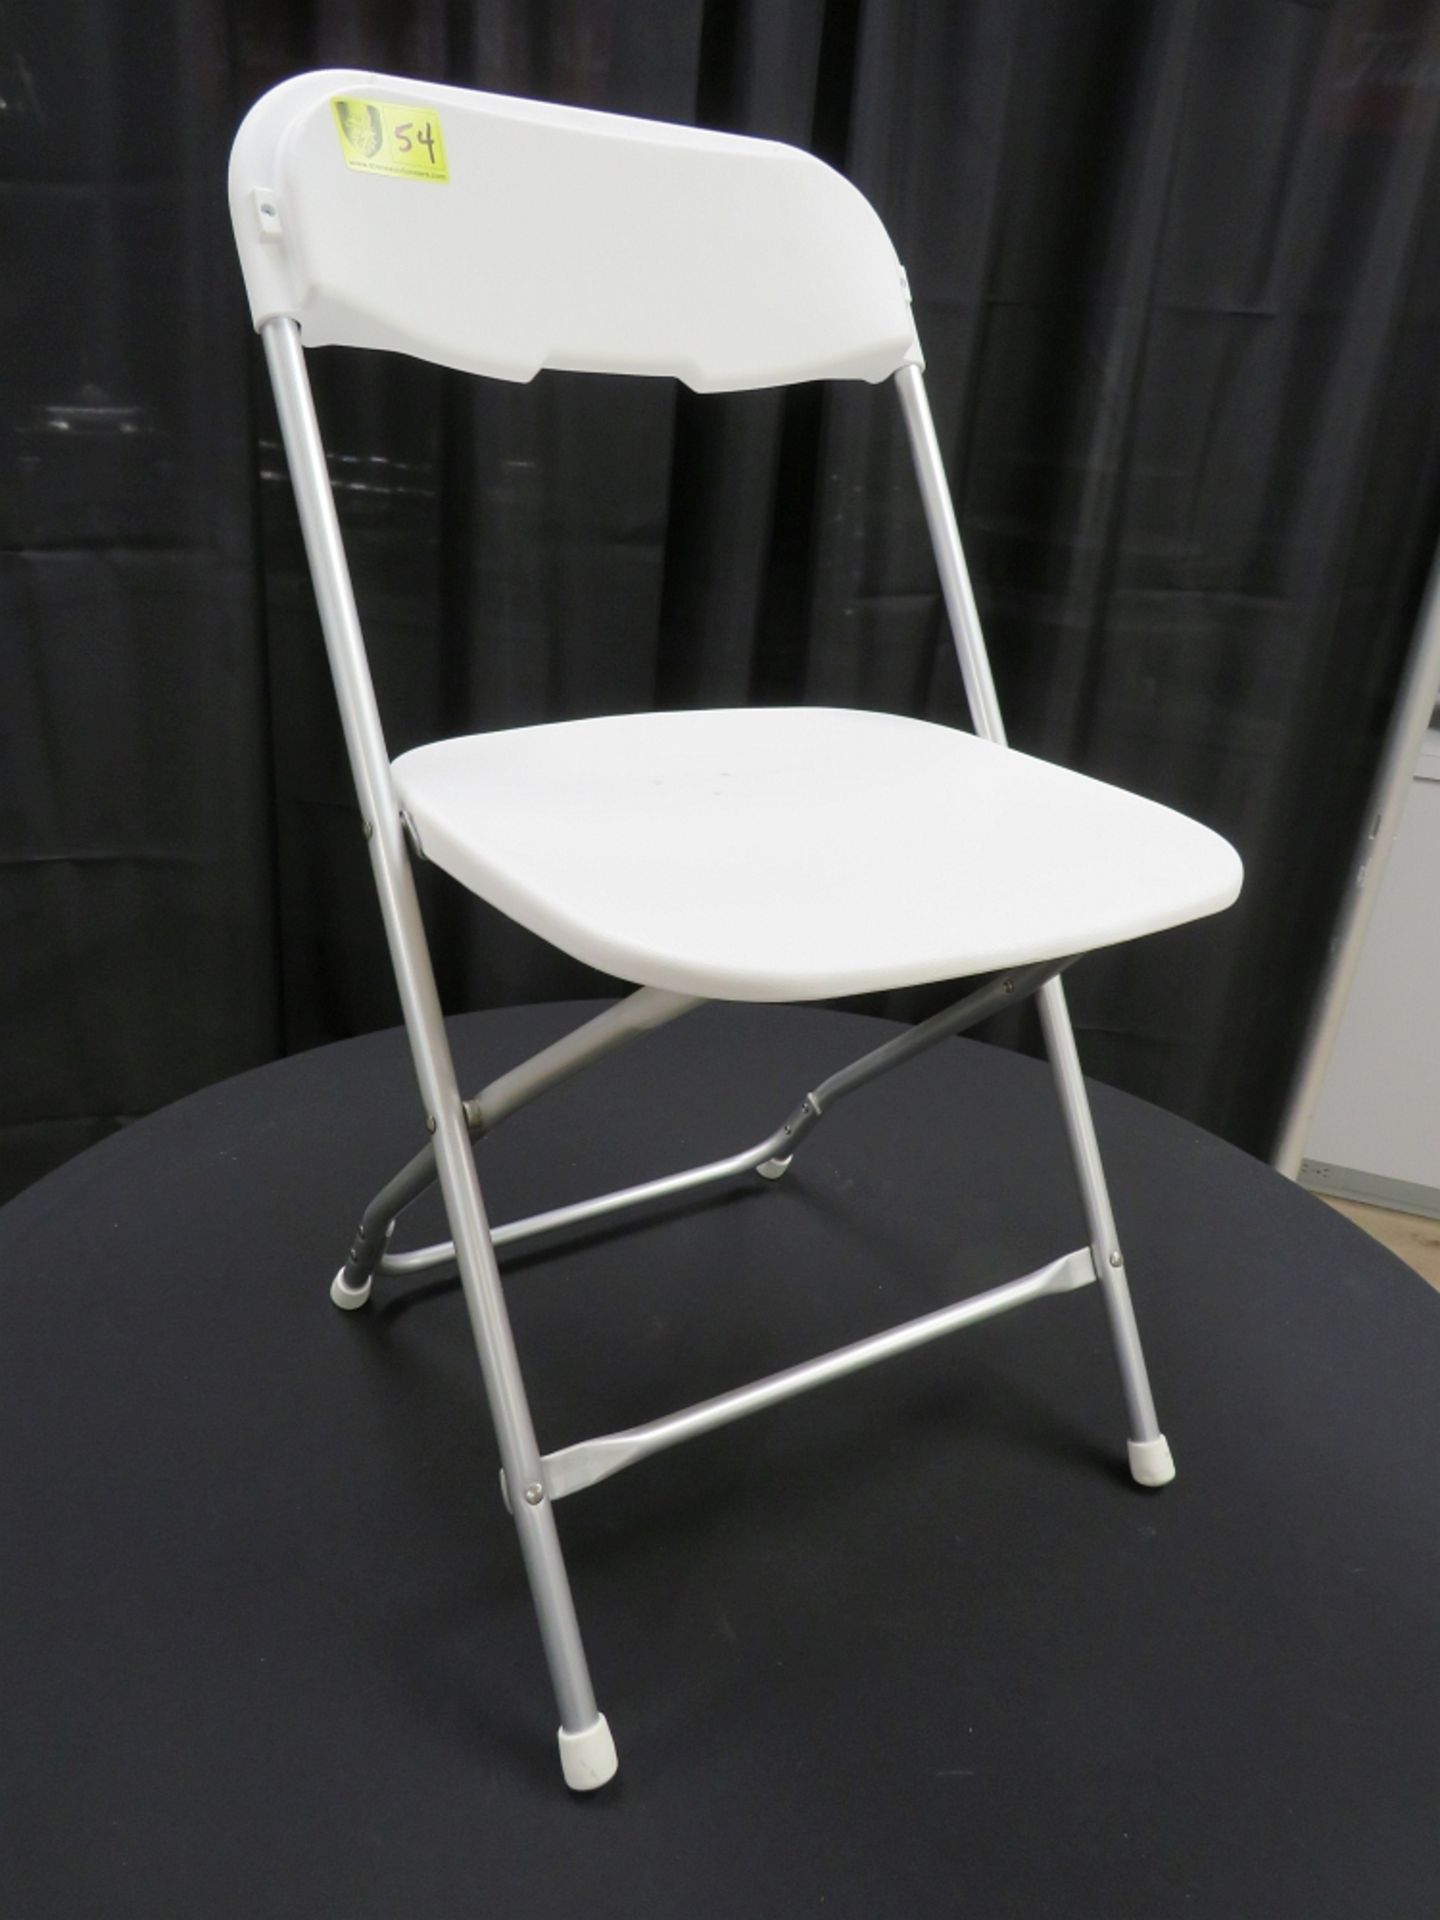 ALLOYFOLD WHITE ALUMINUM FOLDING CHAIR PURCHASED NEW IN 2020